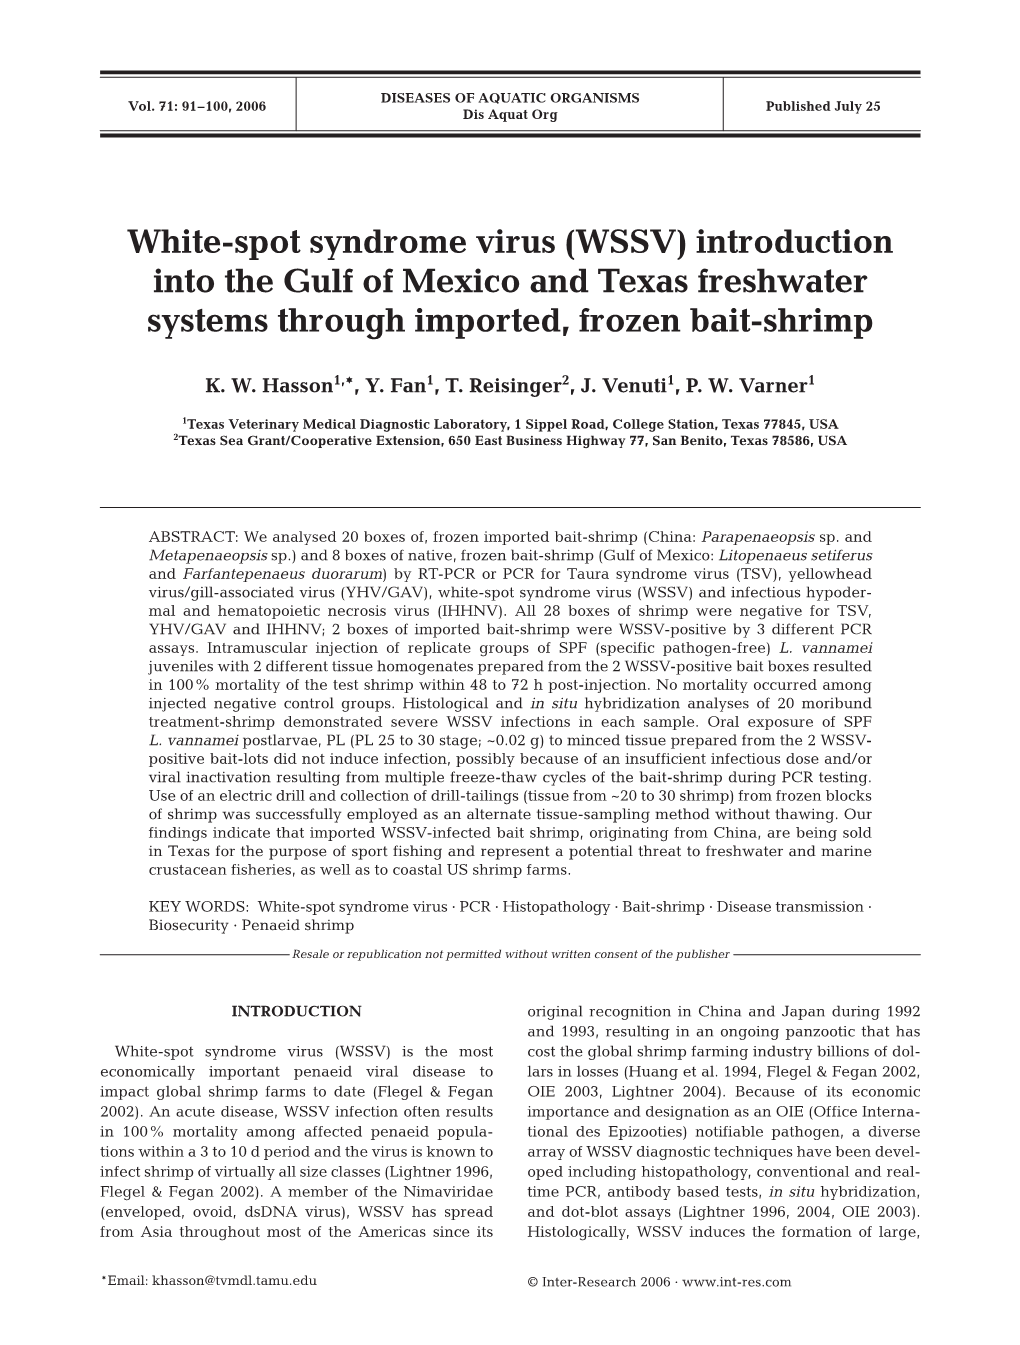 White-Spot Syndrome Virus (WSSV) Introduction Into the Gulf of Mexico and Texas Freshwater Systems Through Imported, Frozen Bait-Shrimp